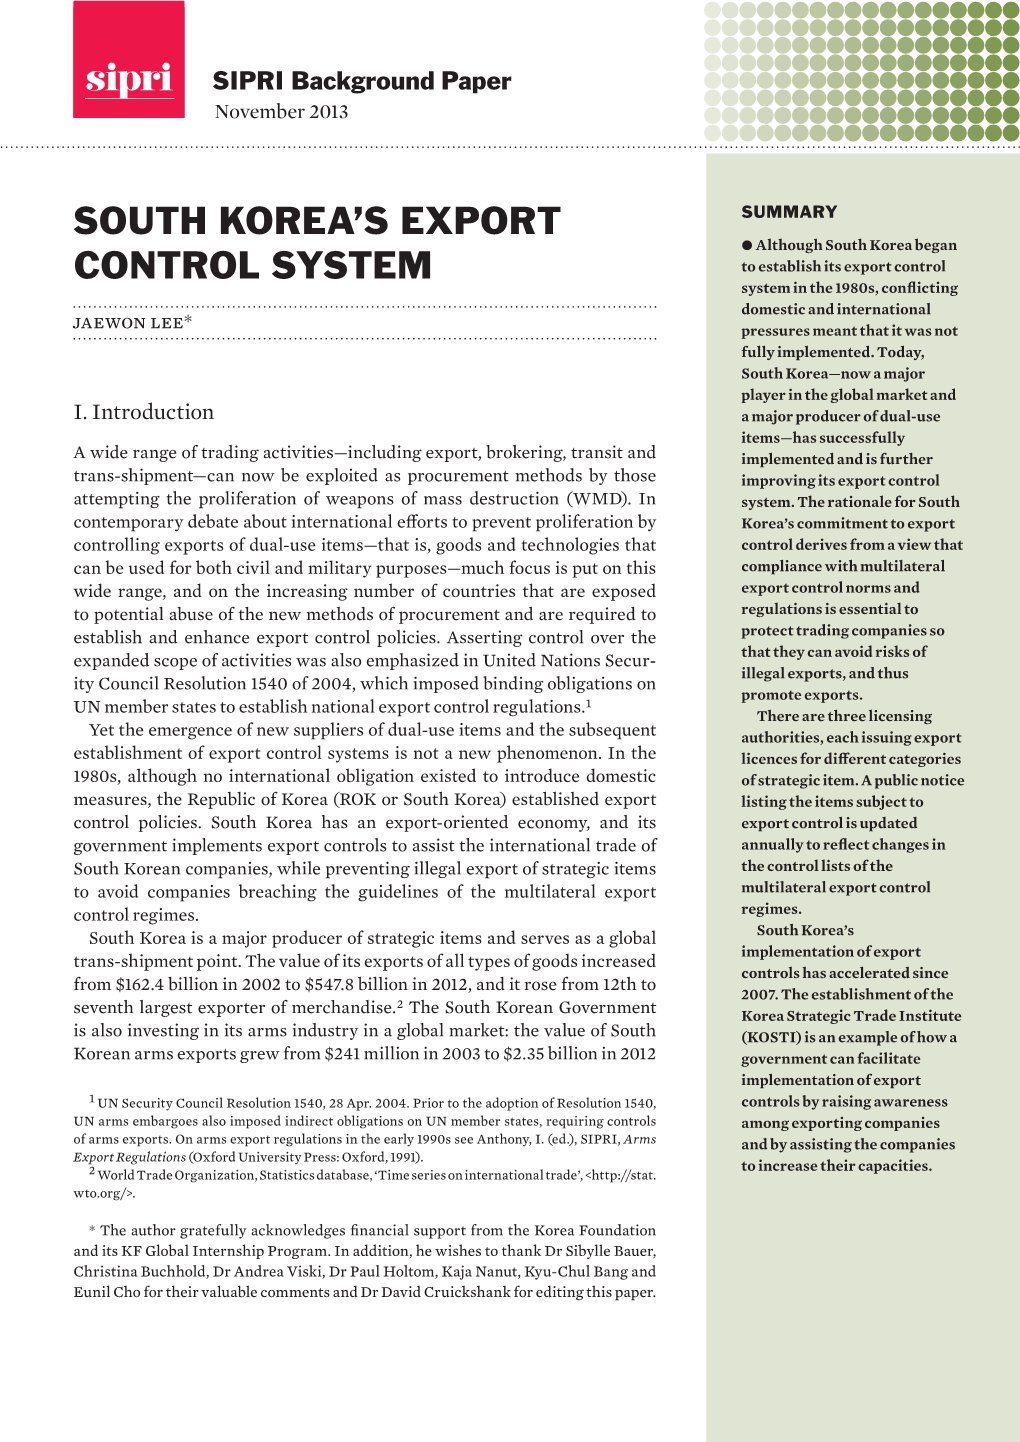 South Korea's Export Control System, SIPRI Background Paper